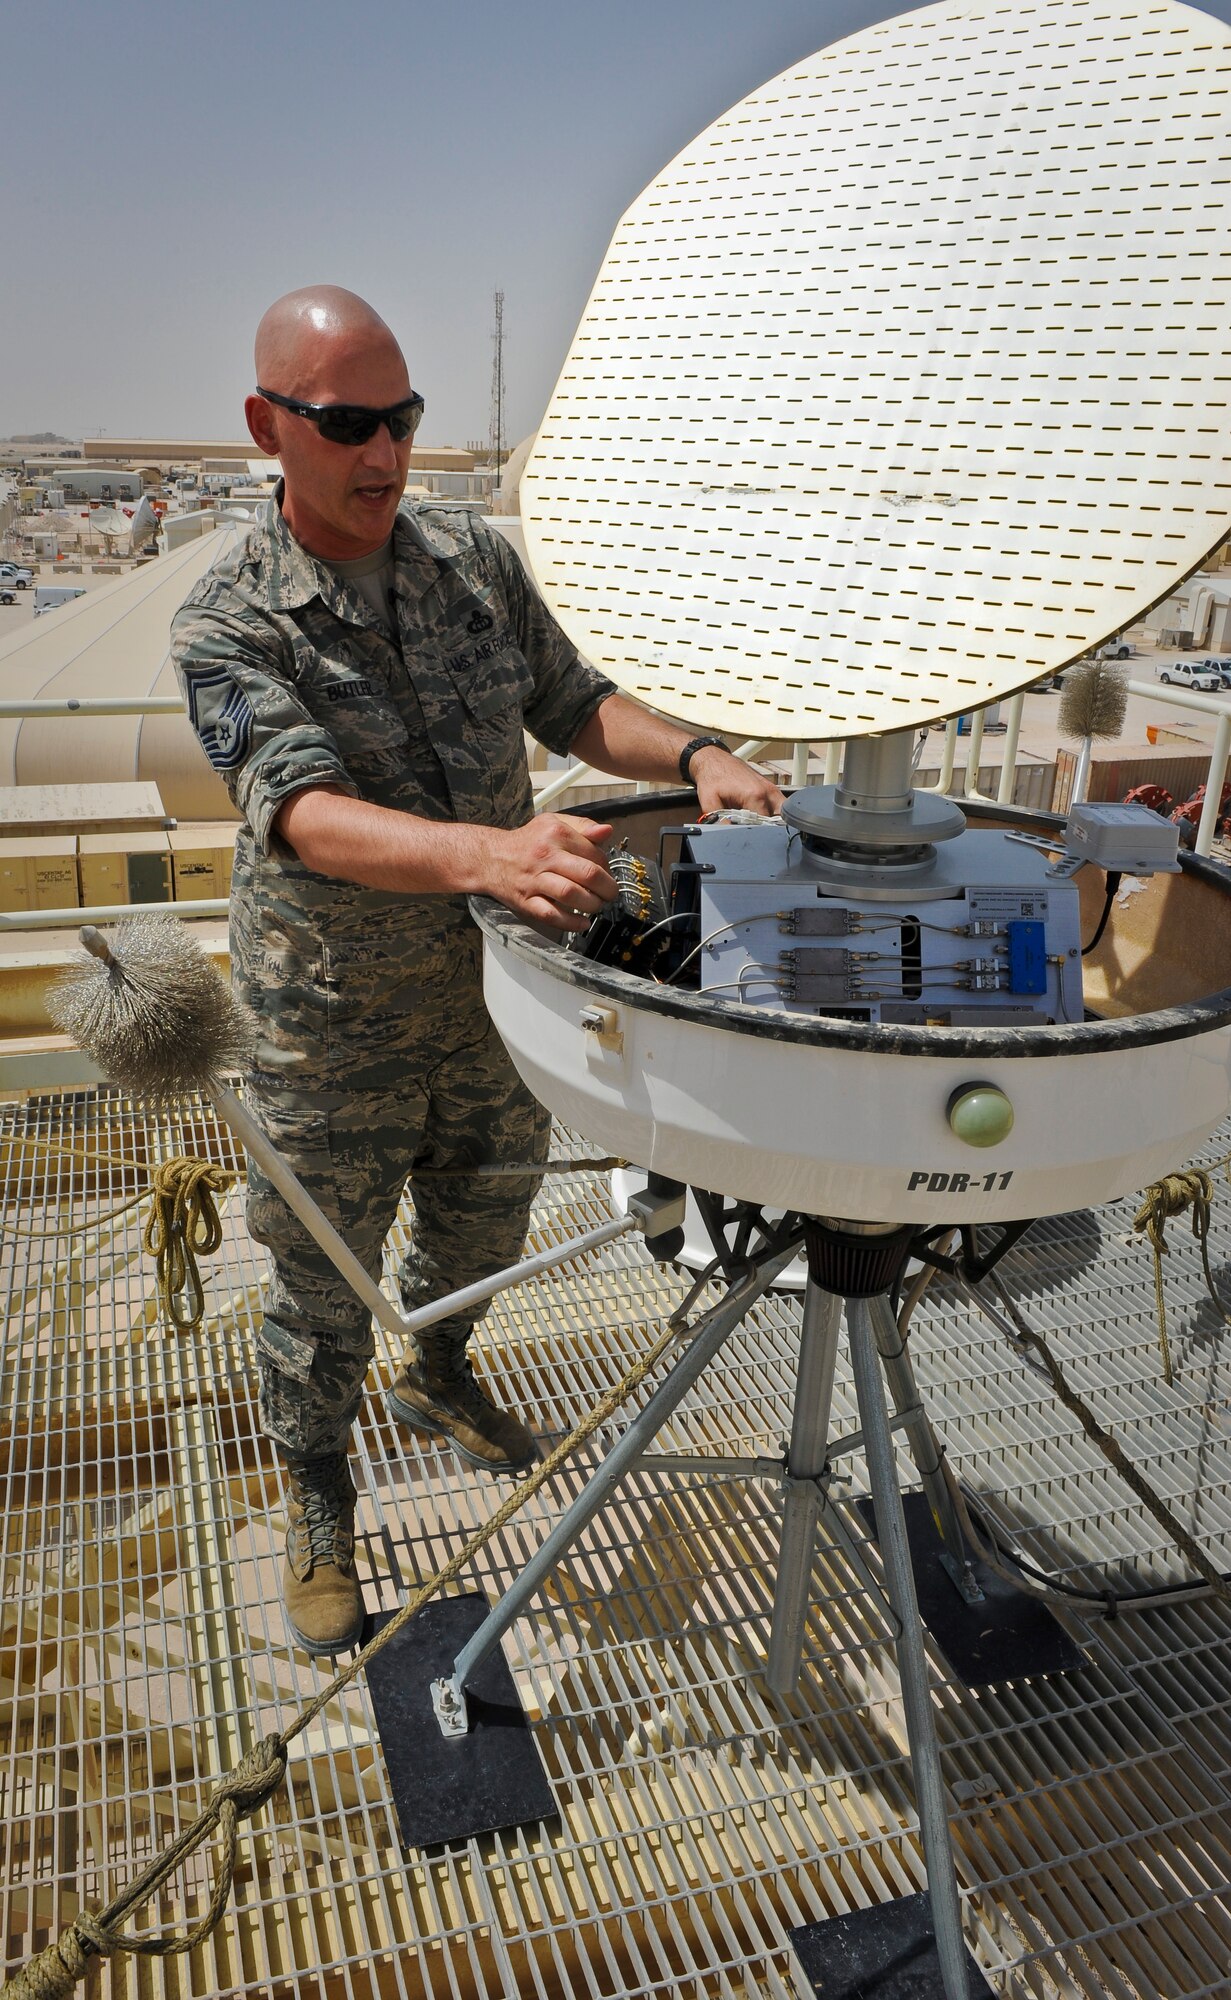 Senior Master Sgt. Scott Butler performs preventative maintenance on the 379th Expeditionary Operations Support Squadron’s portable Doppler radar at the 379th Air Expeditionary Wing in Southwest Asia. Butler is the 379th EOSS weather flight chief deployed from Offutt Air Force Base, Neb. (U.S. Air Force photo/Senior Airman Benjamin Stratton)